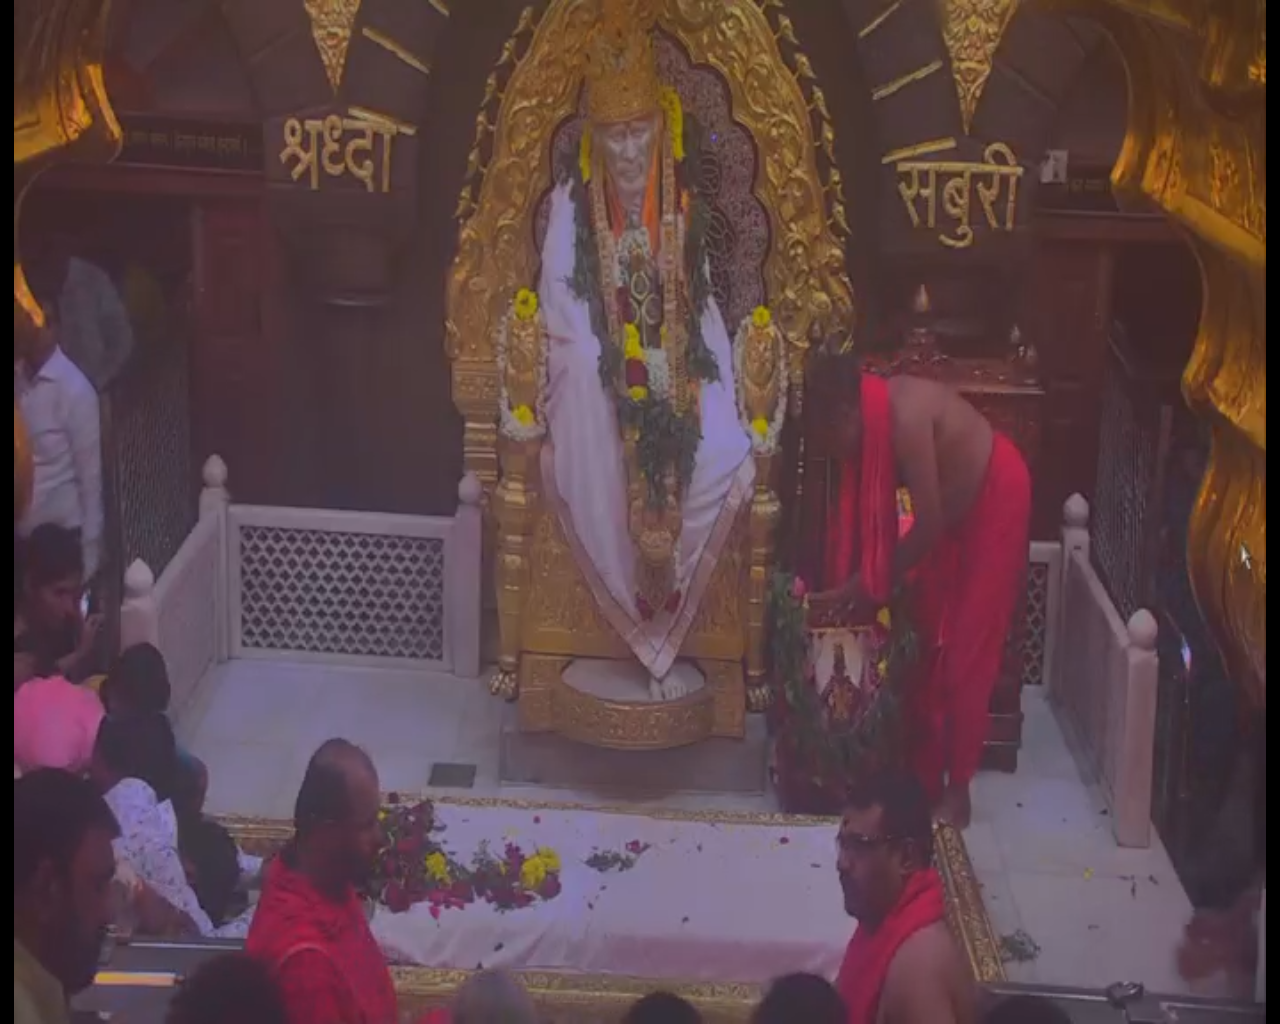 vithal appeared in shirdi saibaba